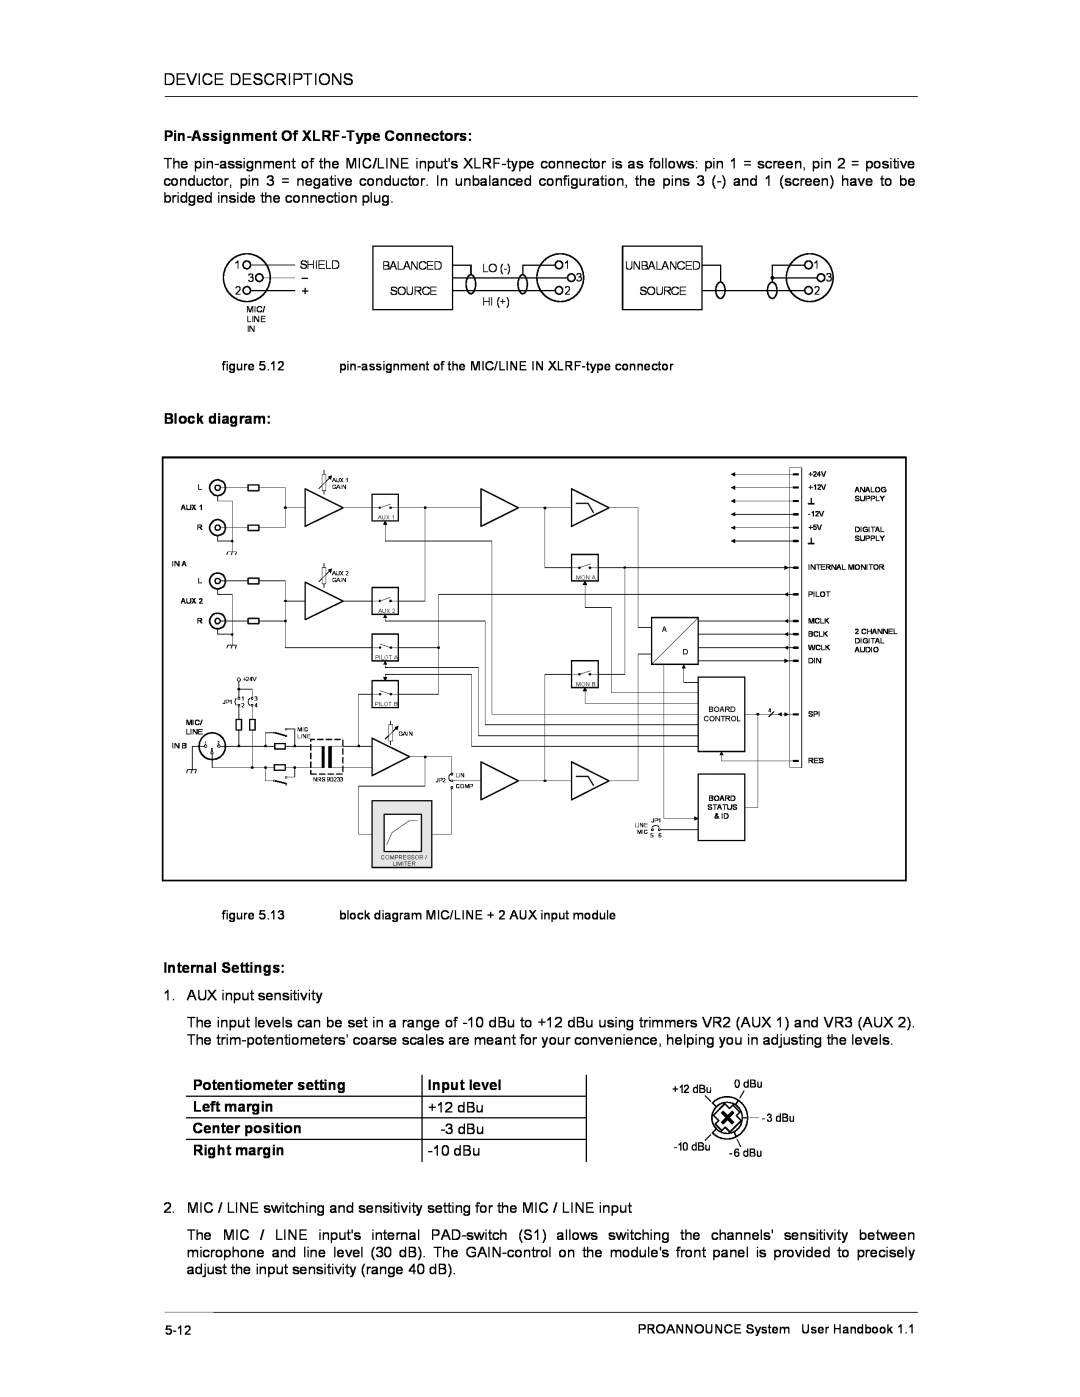 Dynacord DPM 4000 manual Pin-AssignmentOf XLRF-TypeConnectors 